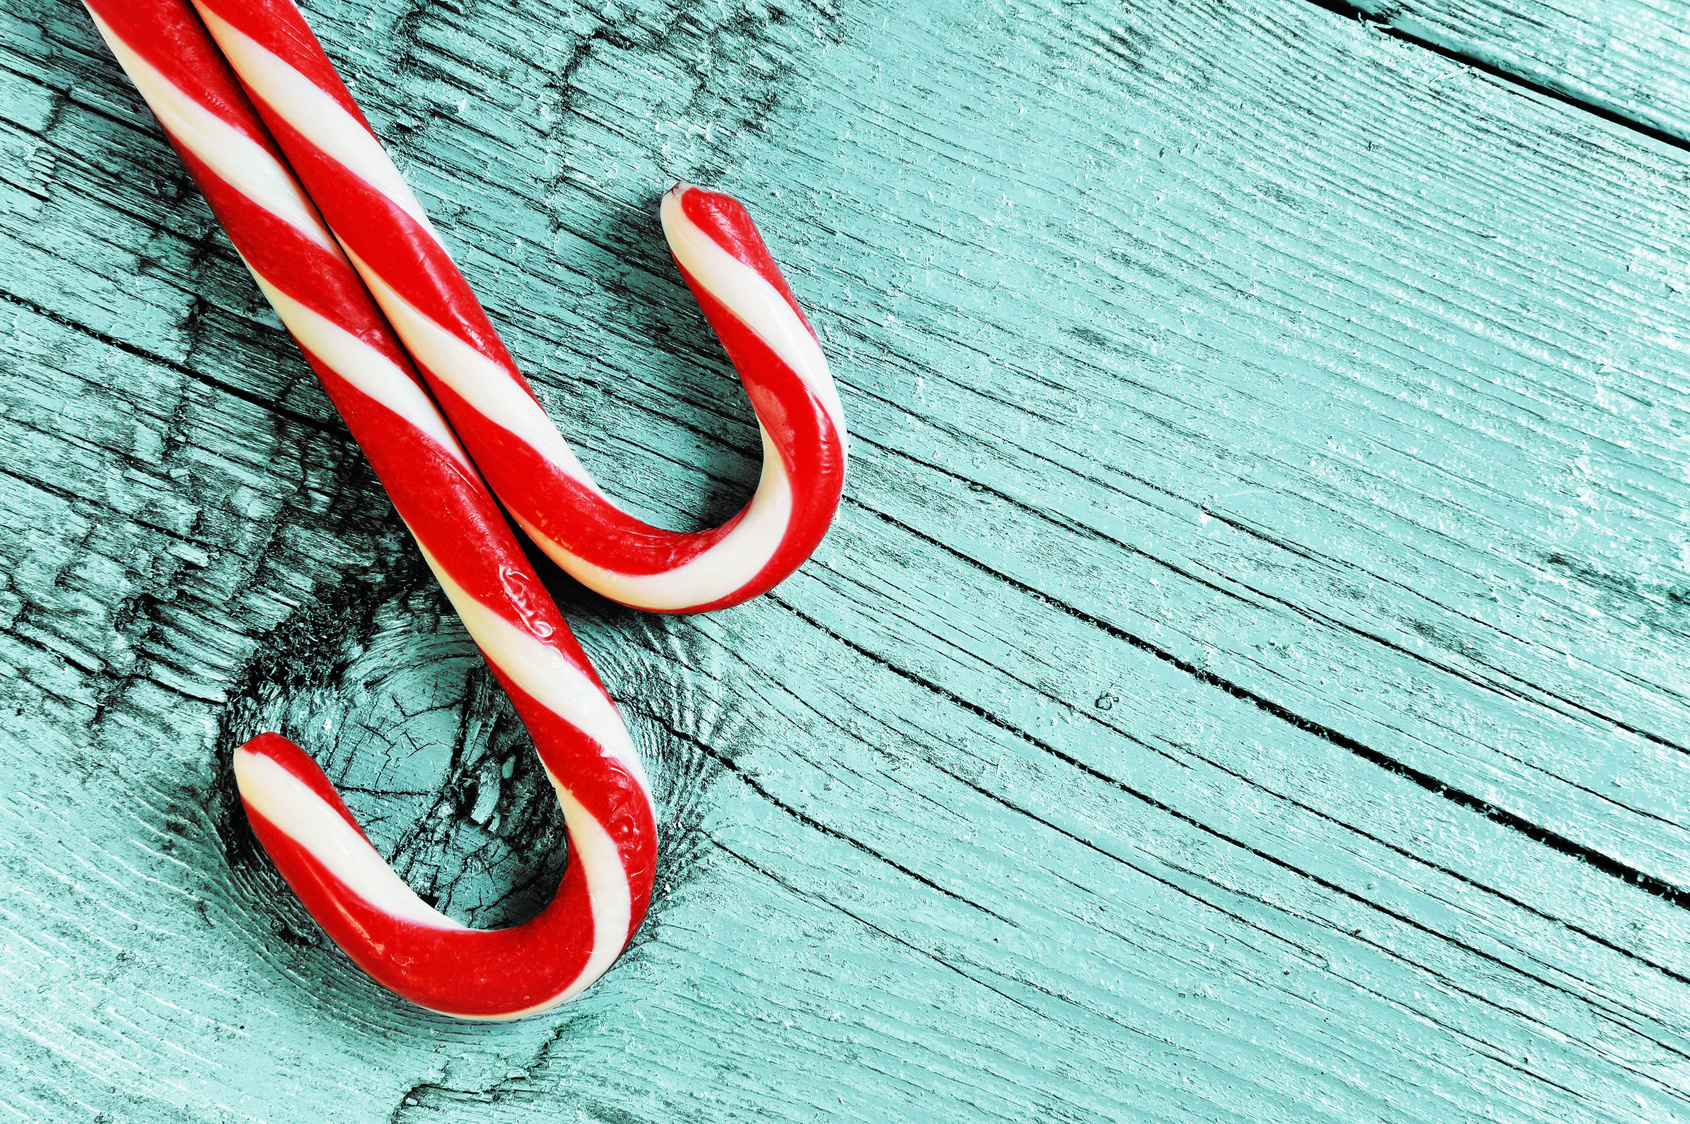 Impress at Your Holiday Parties with the History of the Candy Cane!